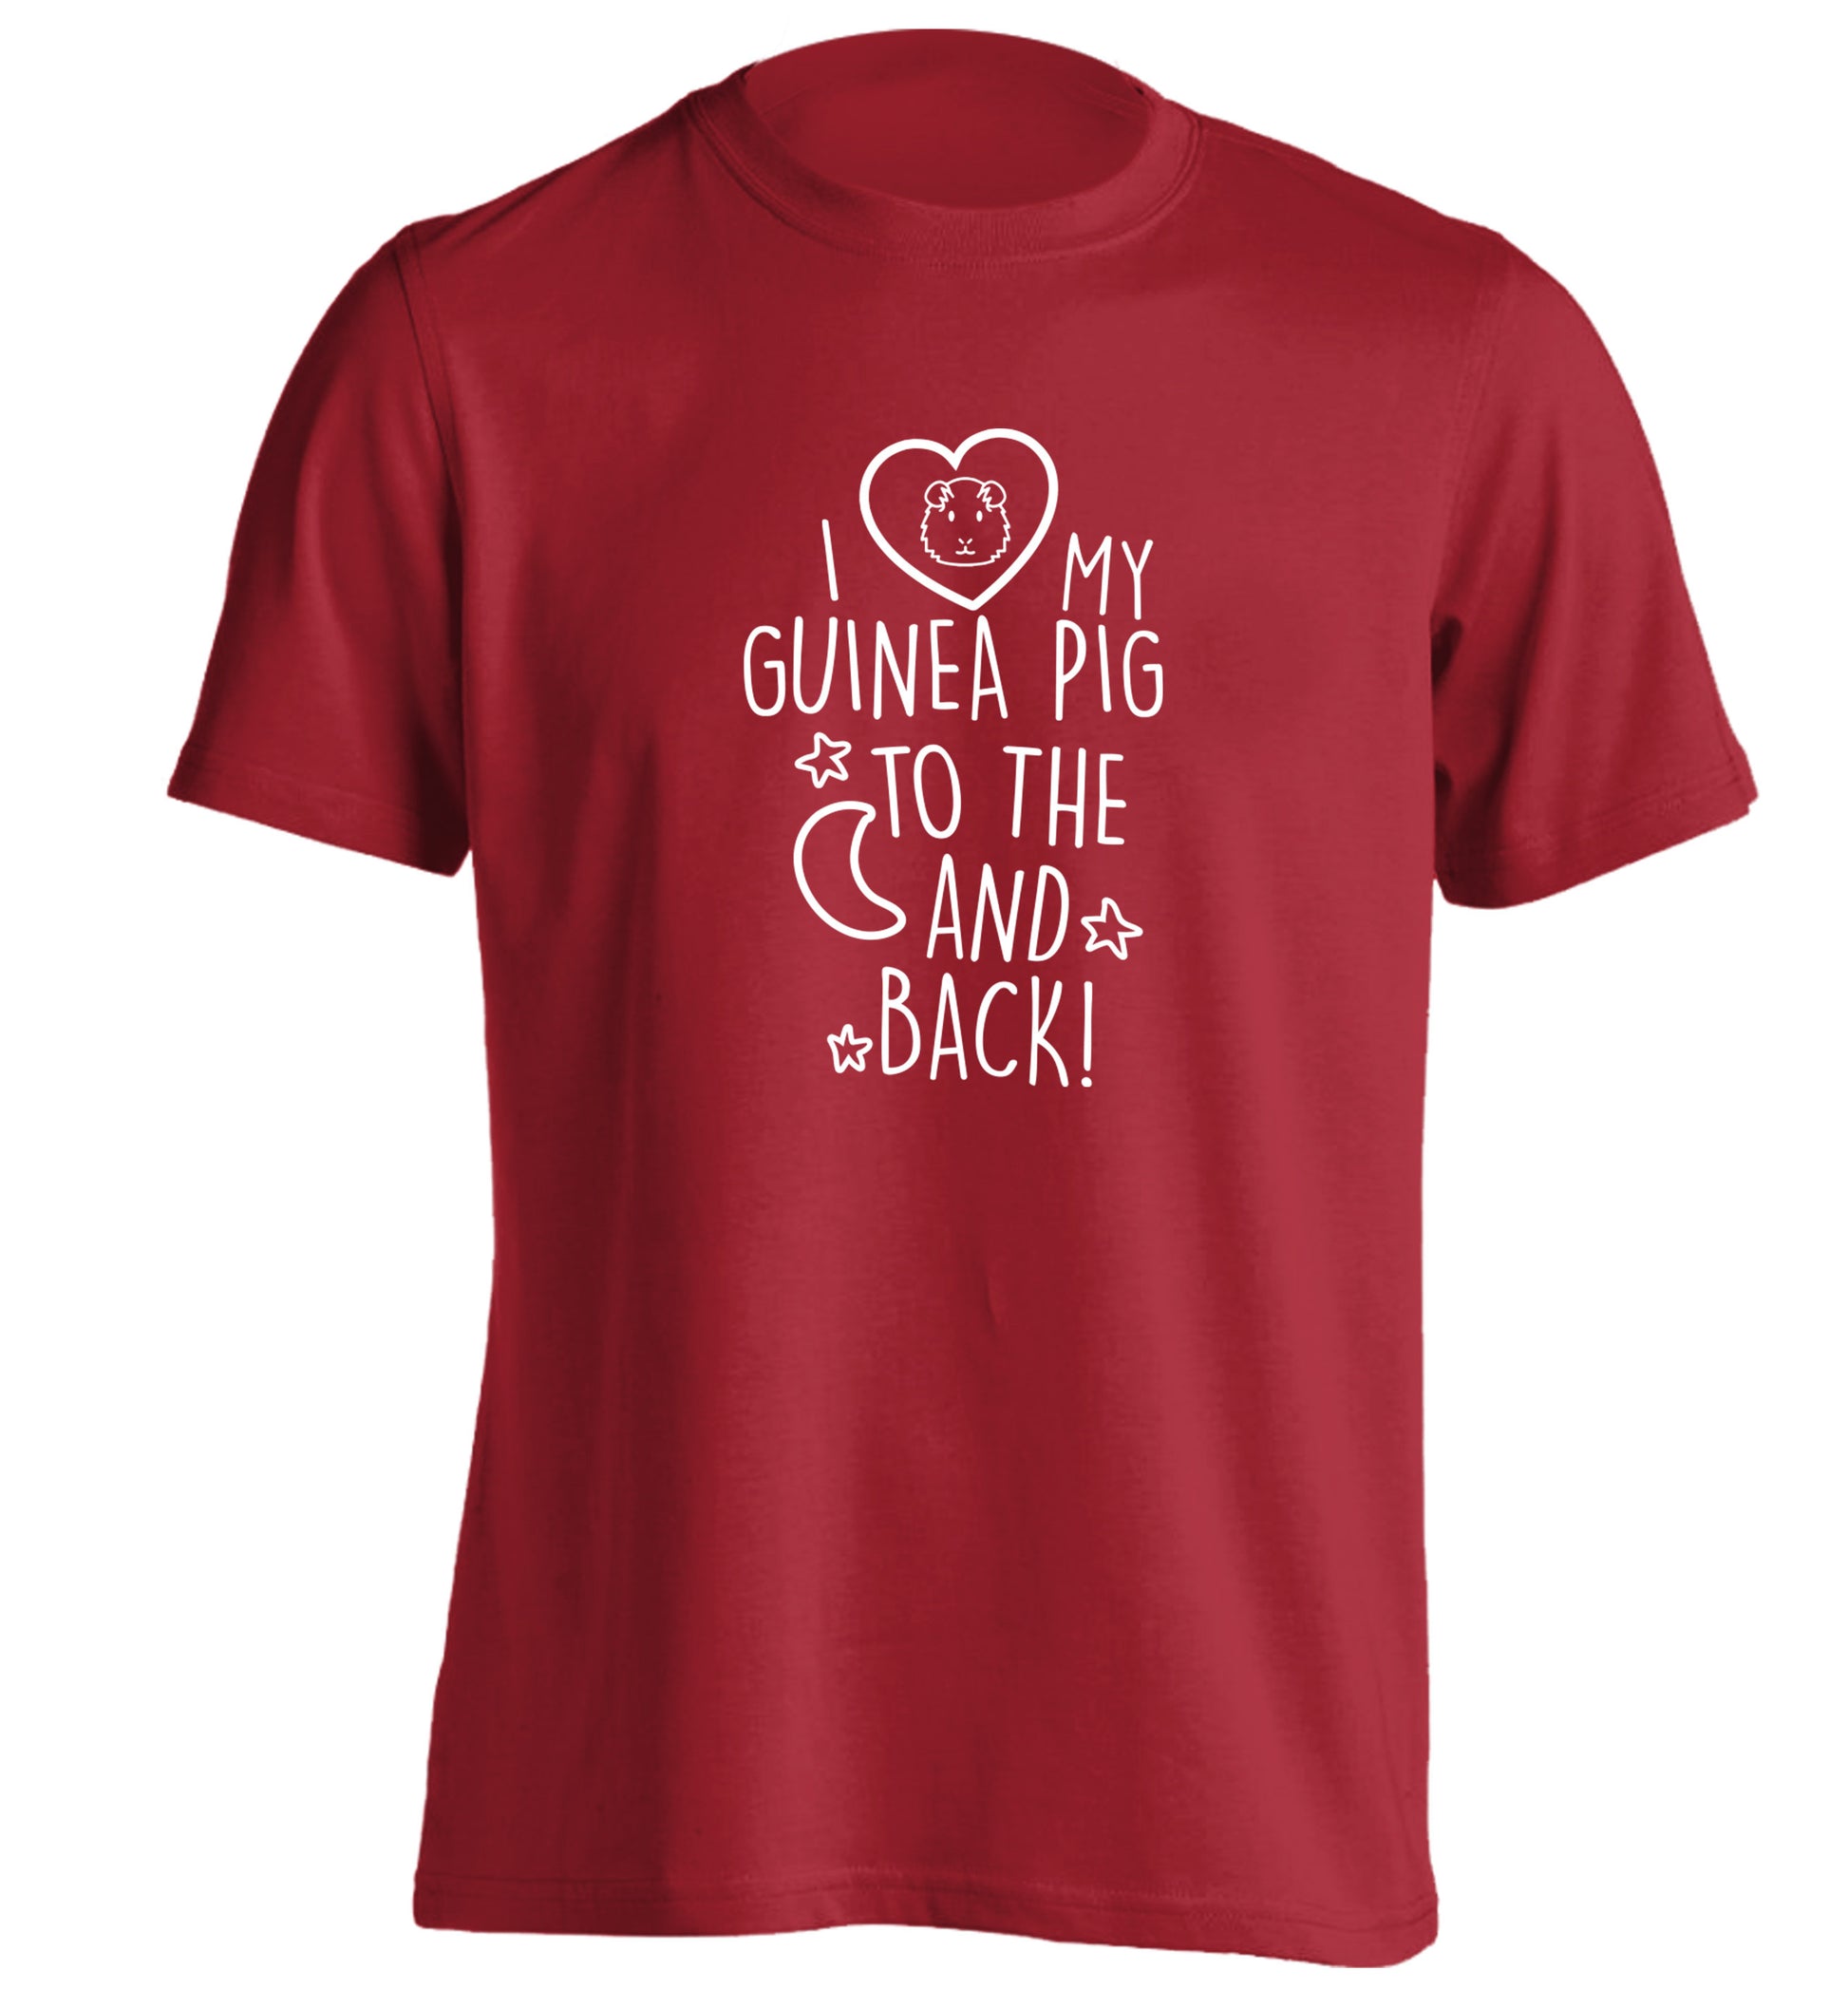 I love my guinea pig to the moon and back adults unisex red Tshirt 2XL